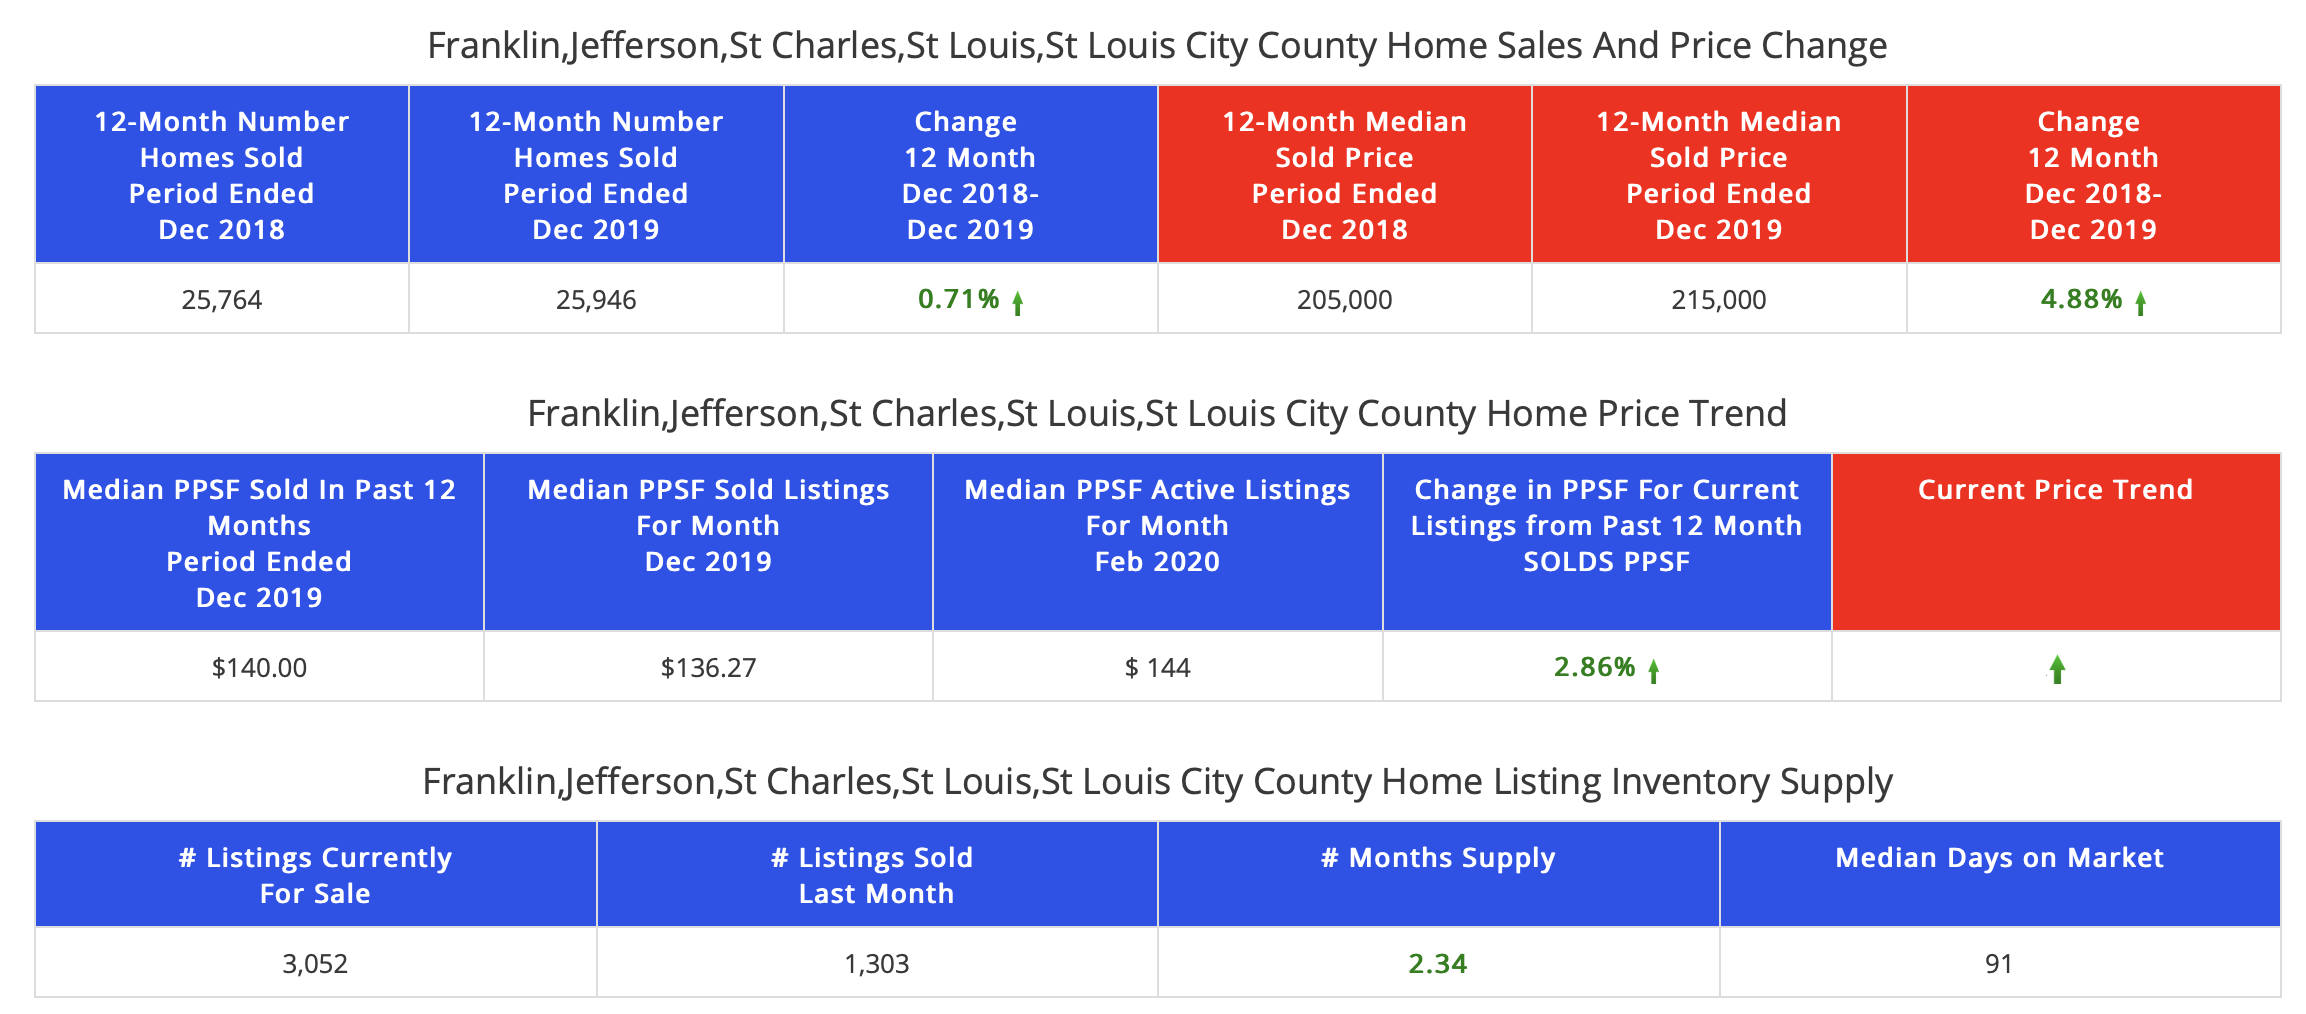 St Louis 5-County Core Market Home Sales and Prices 2019